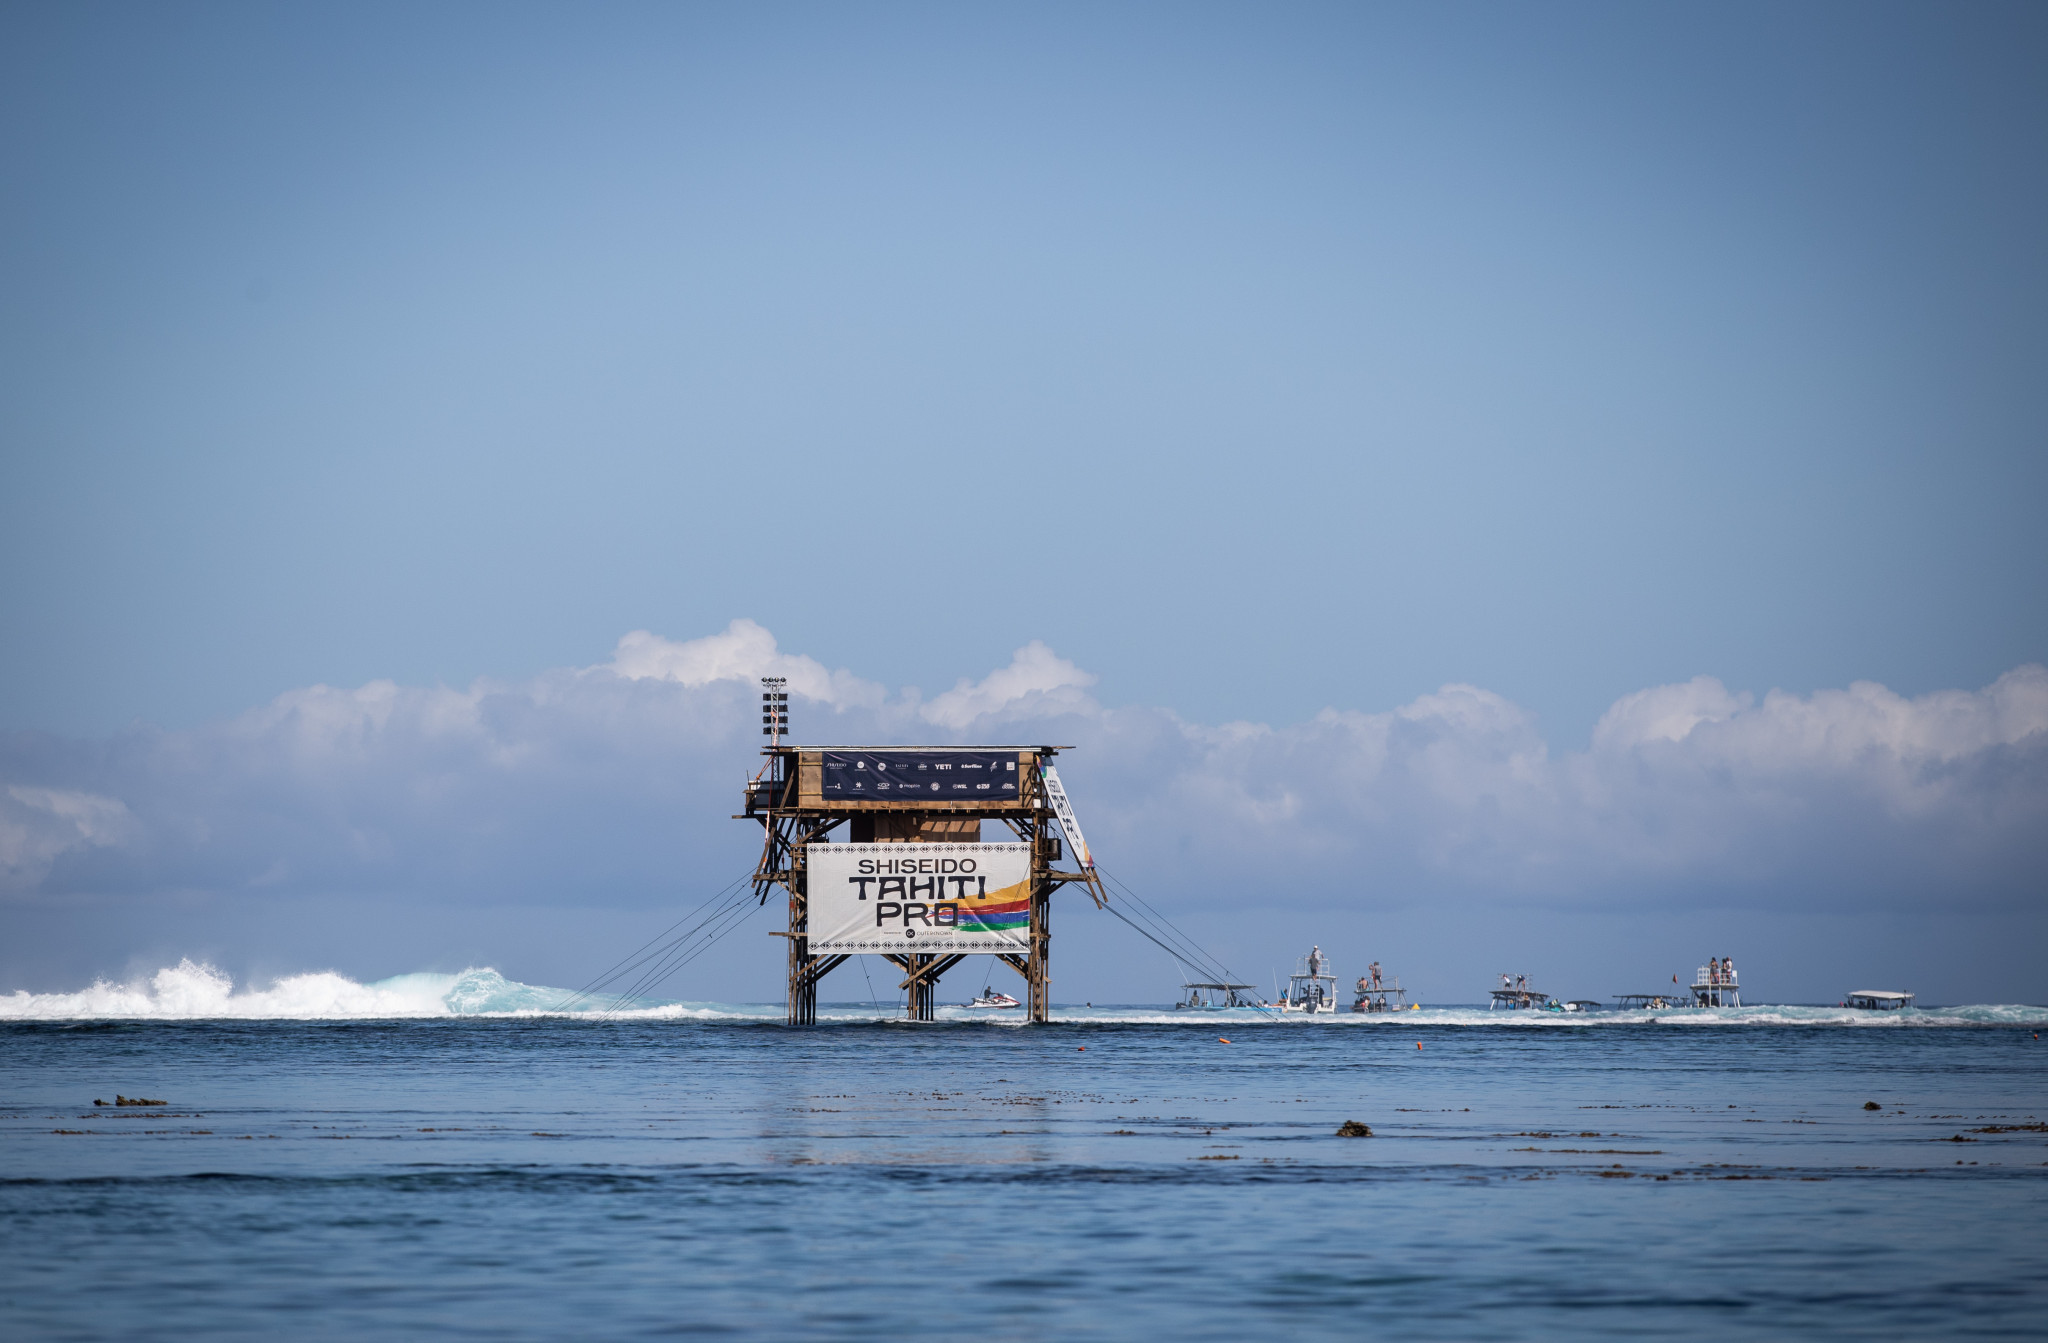 An aluminium tower is planned for surfing at the Paris 2024 Olympics, rather than the wooden structure used for the World Surf League Tahiti Pro ©Getty Images